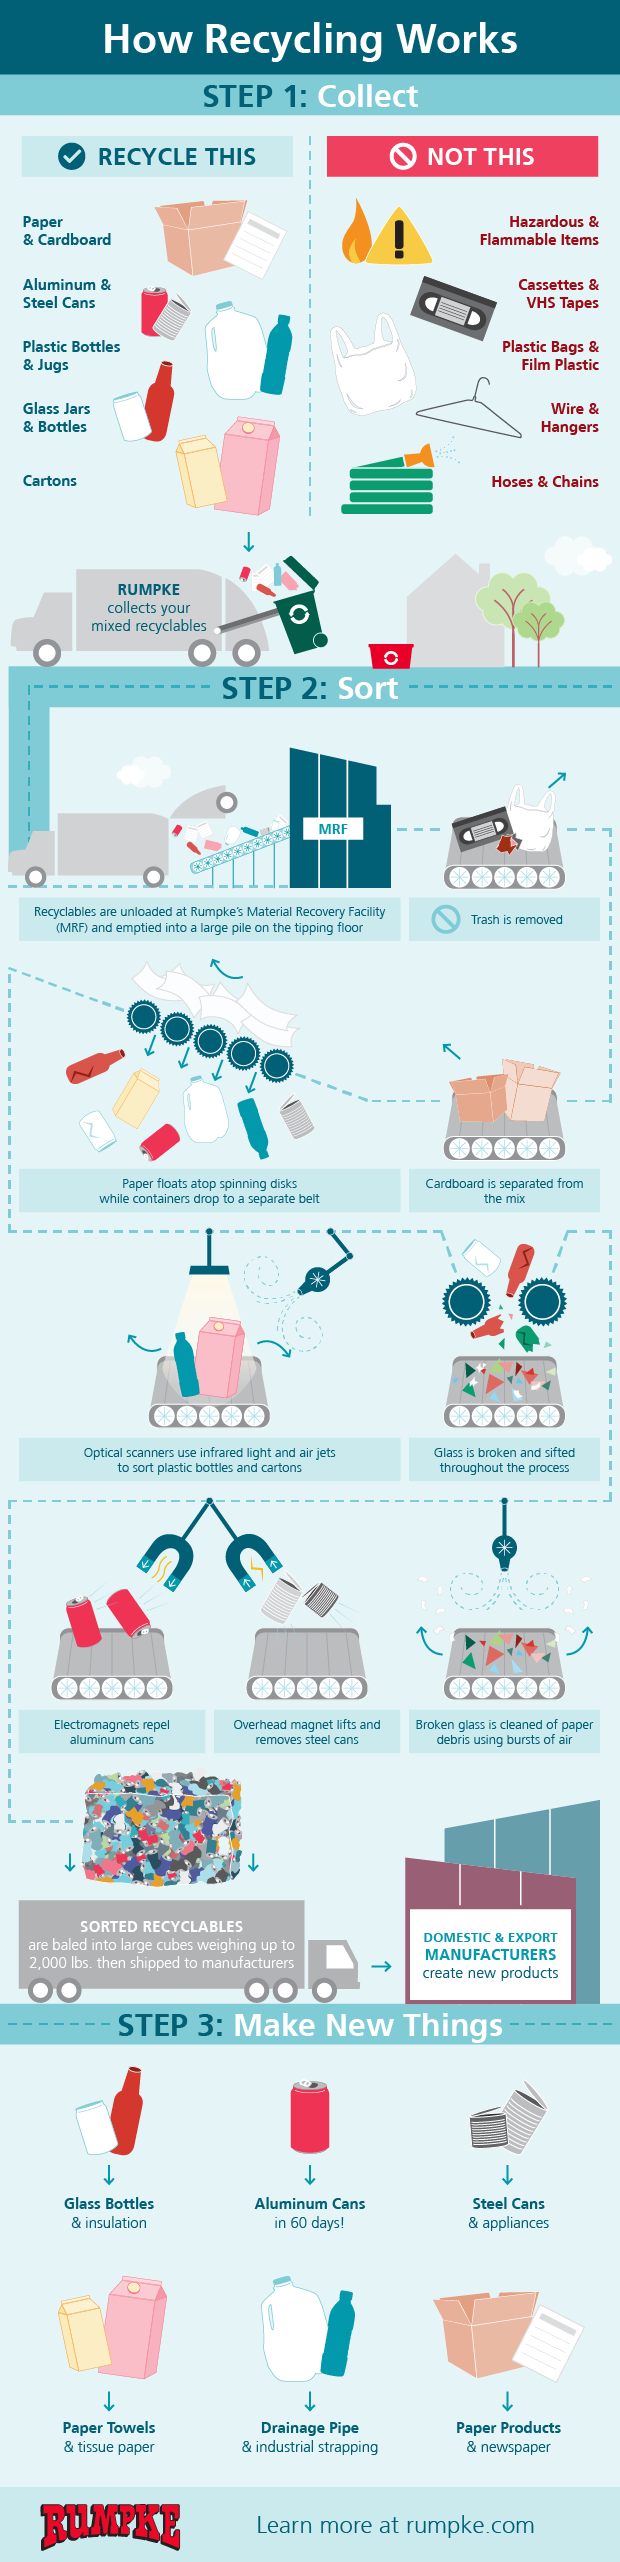 how-recycling-works-infographic